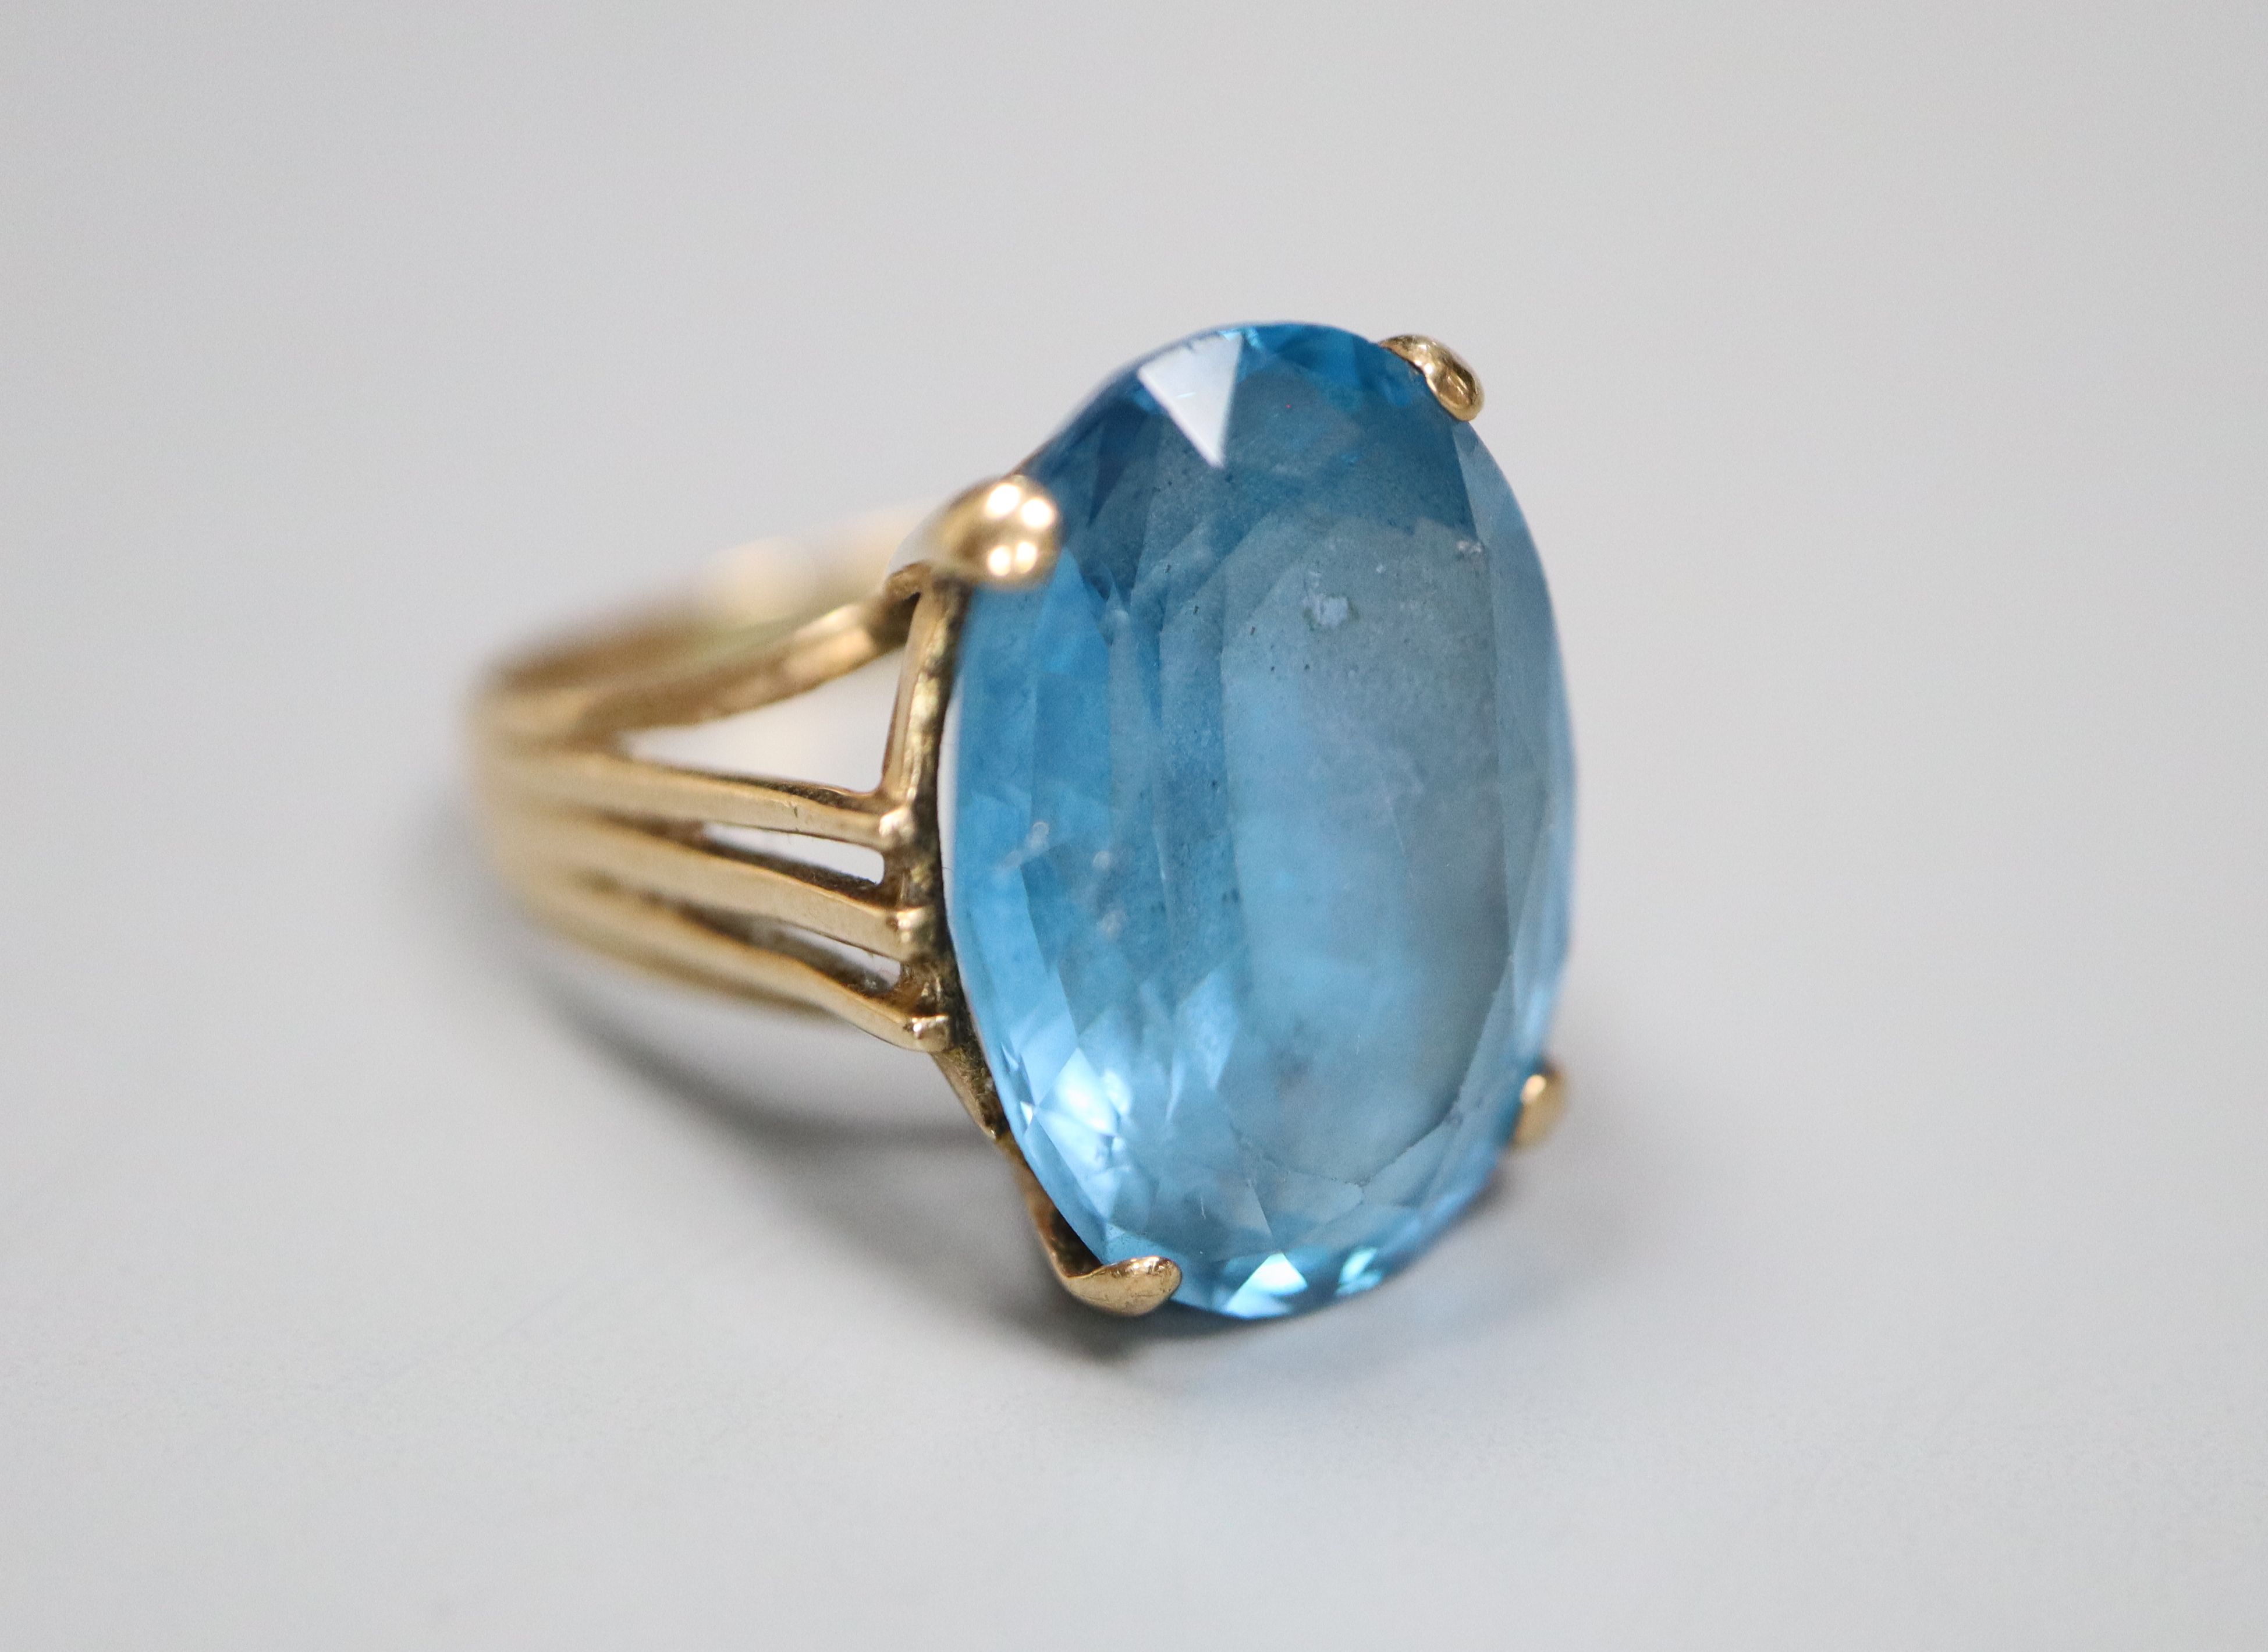 A modern 9ct gold and blue paste? set oval dress ring, size K, gross 5.5 grams.